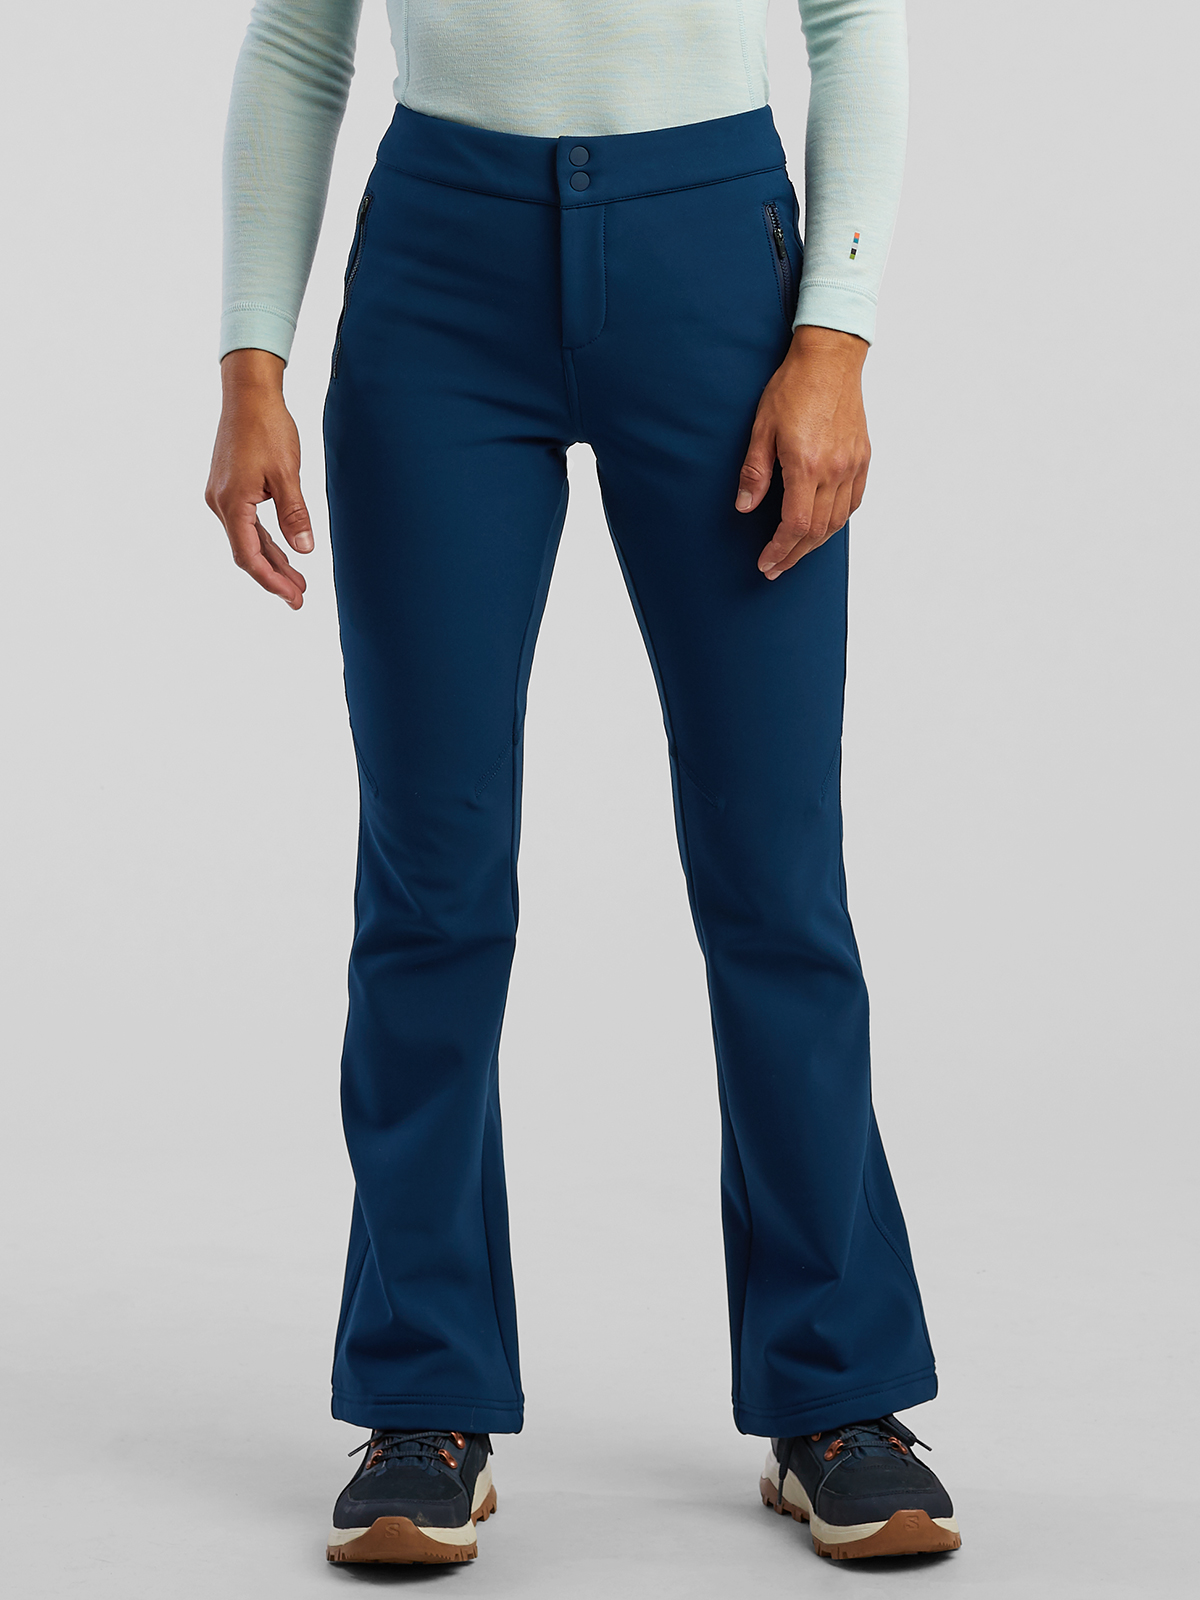 Women's Casual Pants & Trousers - Fleece Lined, Pull-on & More | Blair